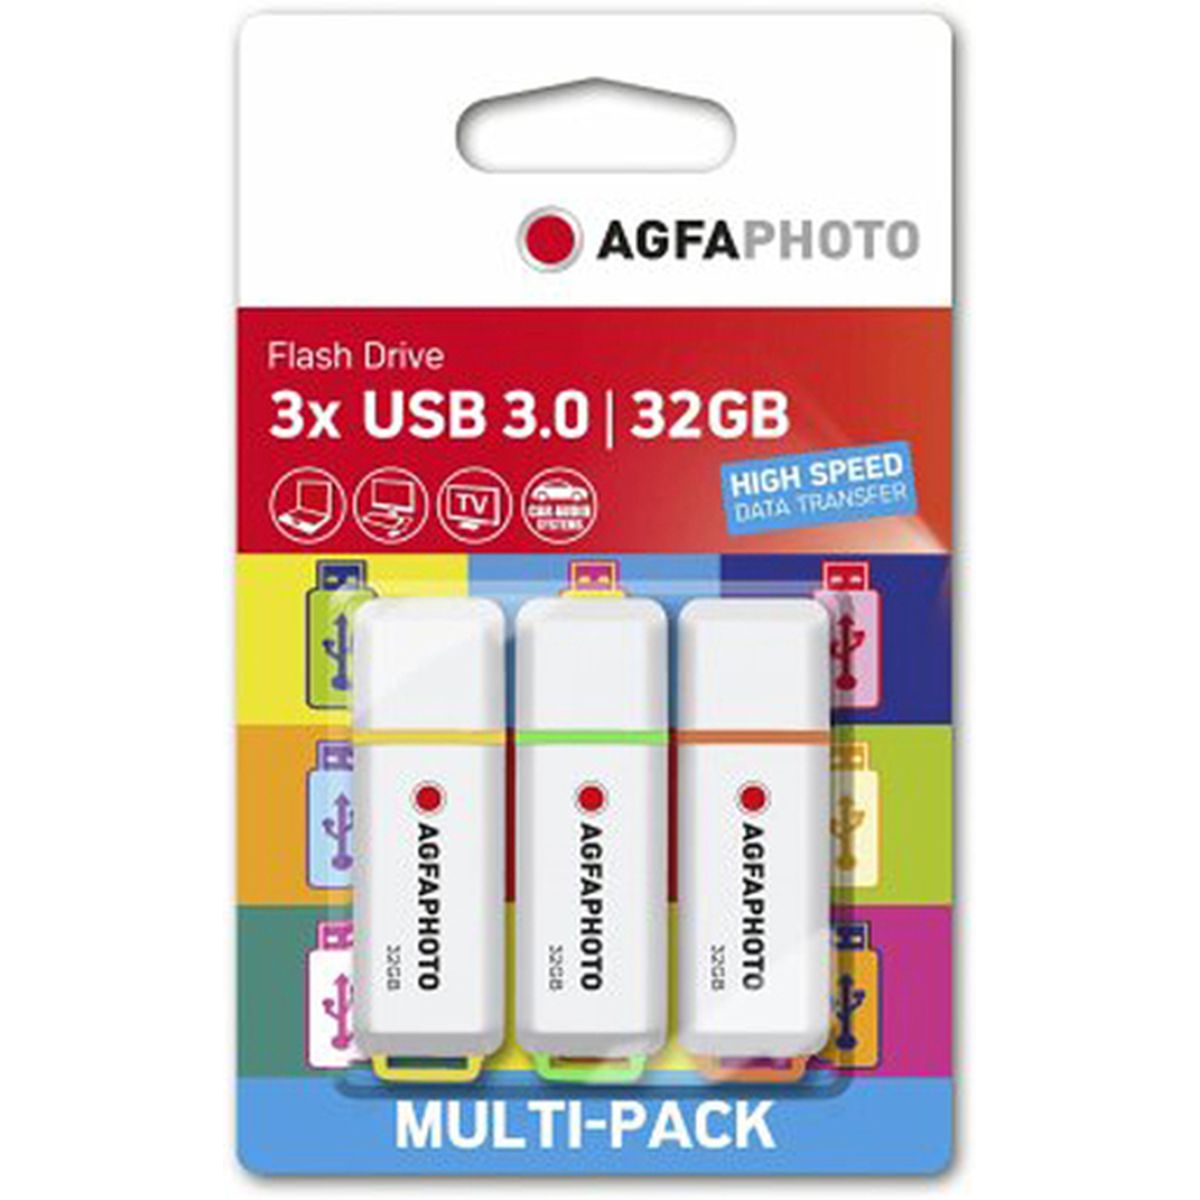 AgfaPhoto USB-Stick 32GB, 3er Pack Color Mix, USB 3.0 Type-A (15/55 MBs)